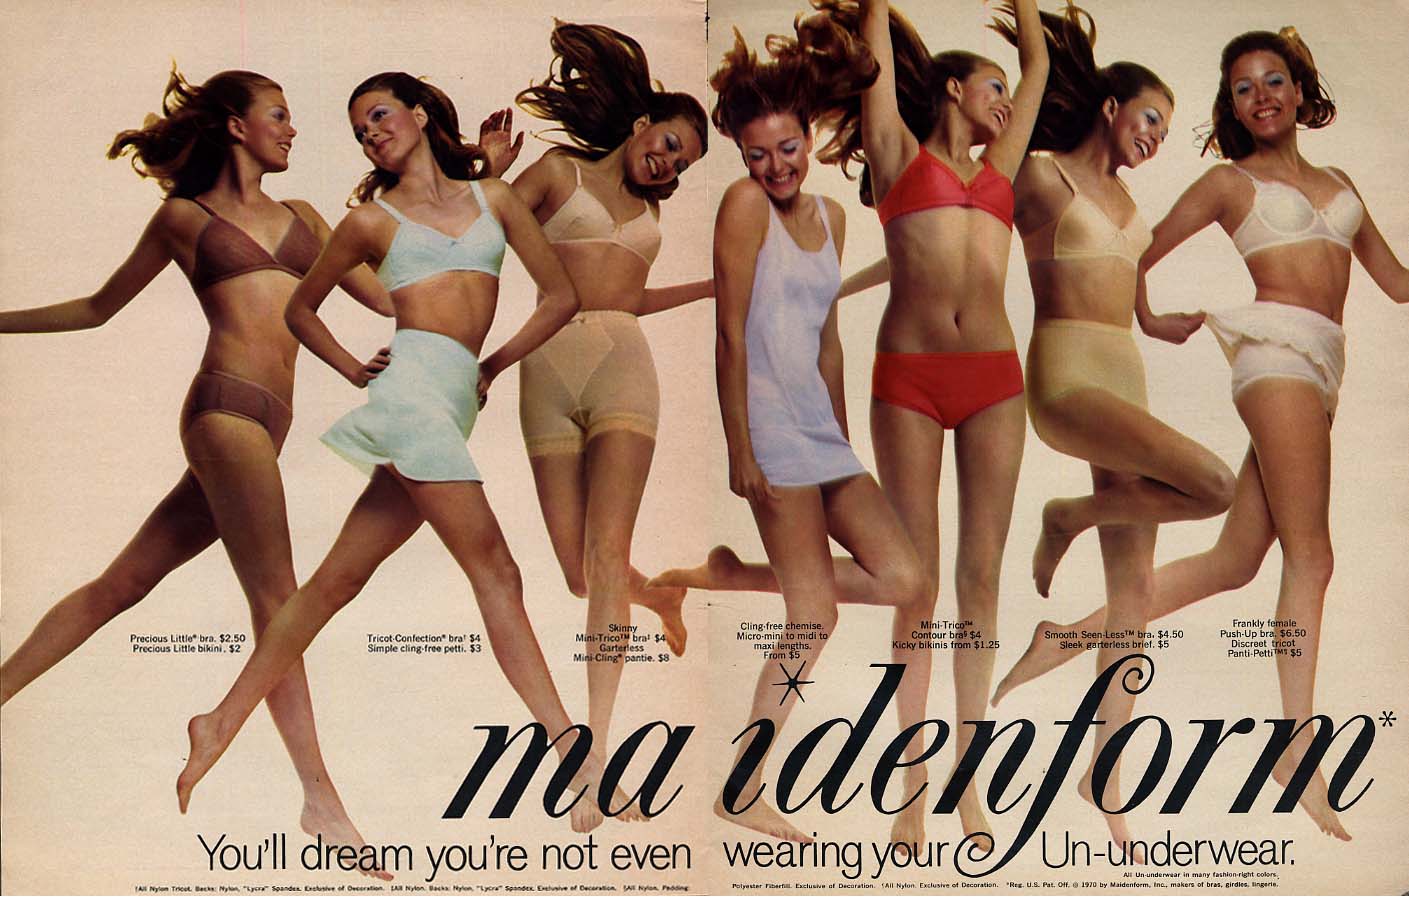 You'll dream you're not even wearing your Maidenform Un-Underwear ad 1970